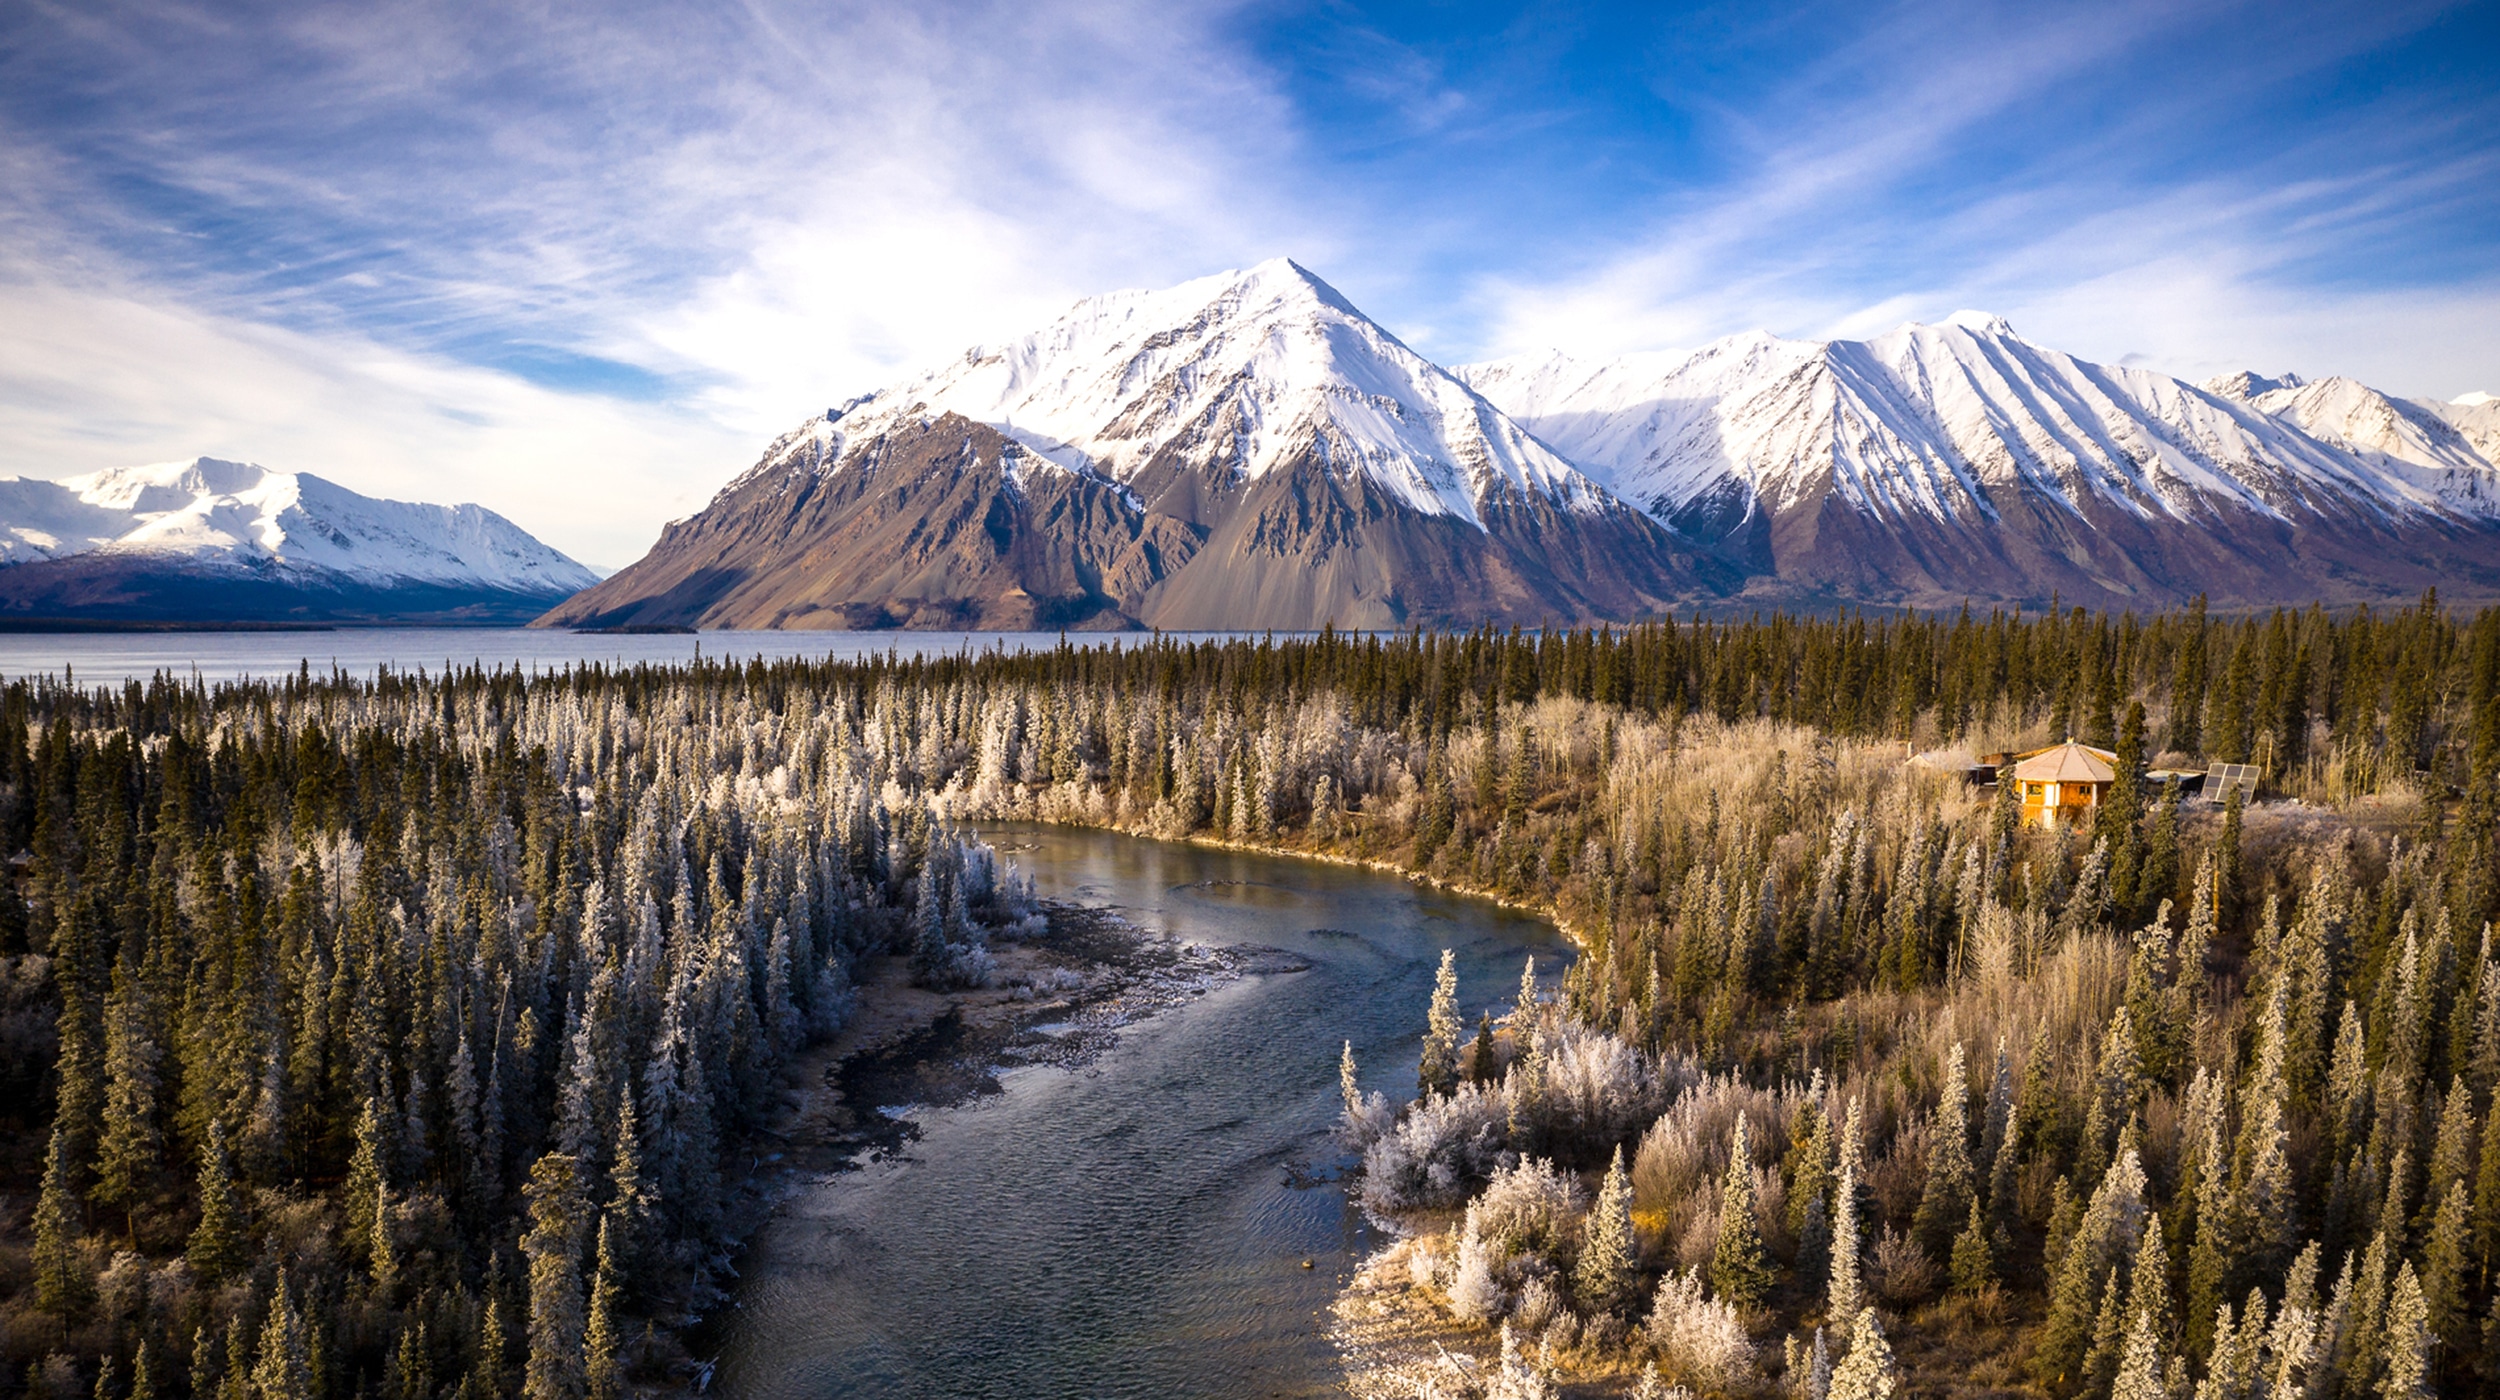 A trip to the Yukon offers a chance to truly get away from it all.